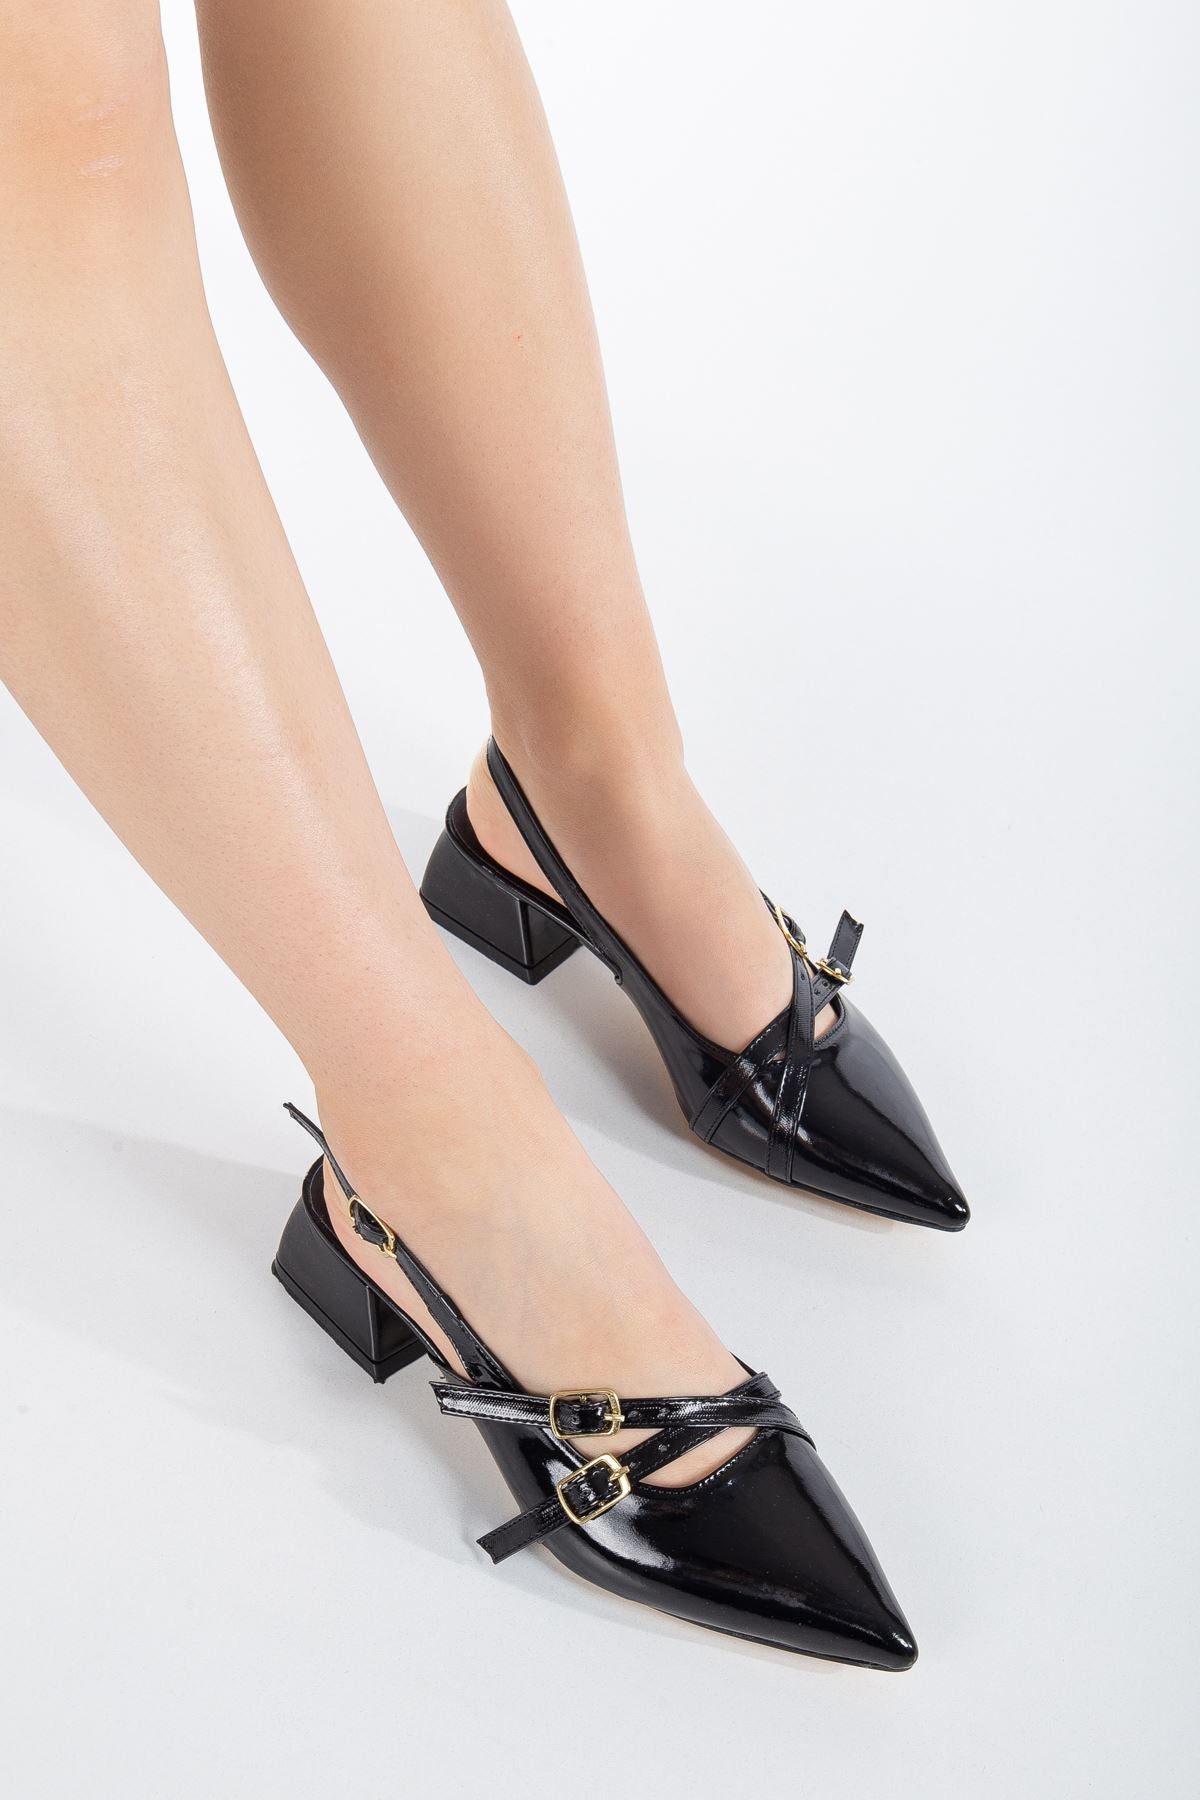 Pary Black Patent Leather Women's Heeled Shoes - STREETMODE™